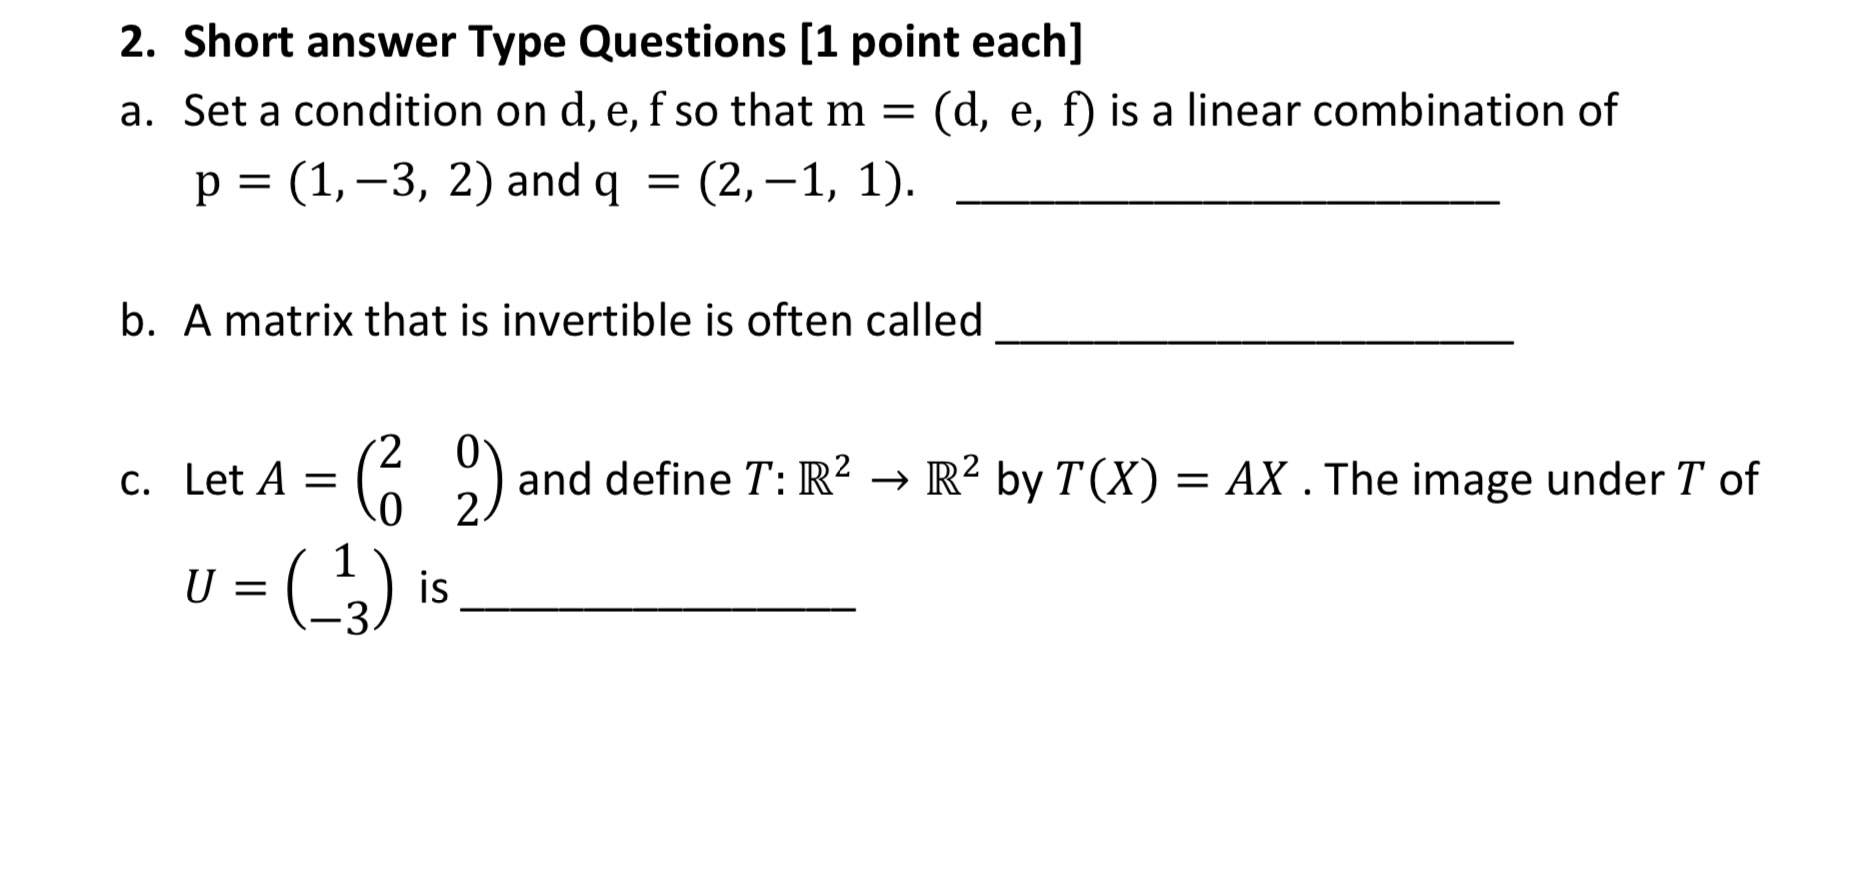 2. Short answer Type Questions [1 point each] a. Set a condition on d, e, f so that m = (d, e, f) is a linear